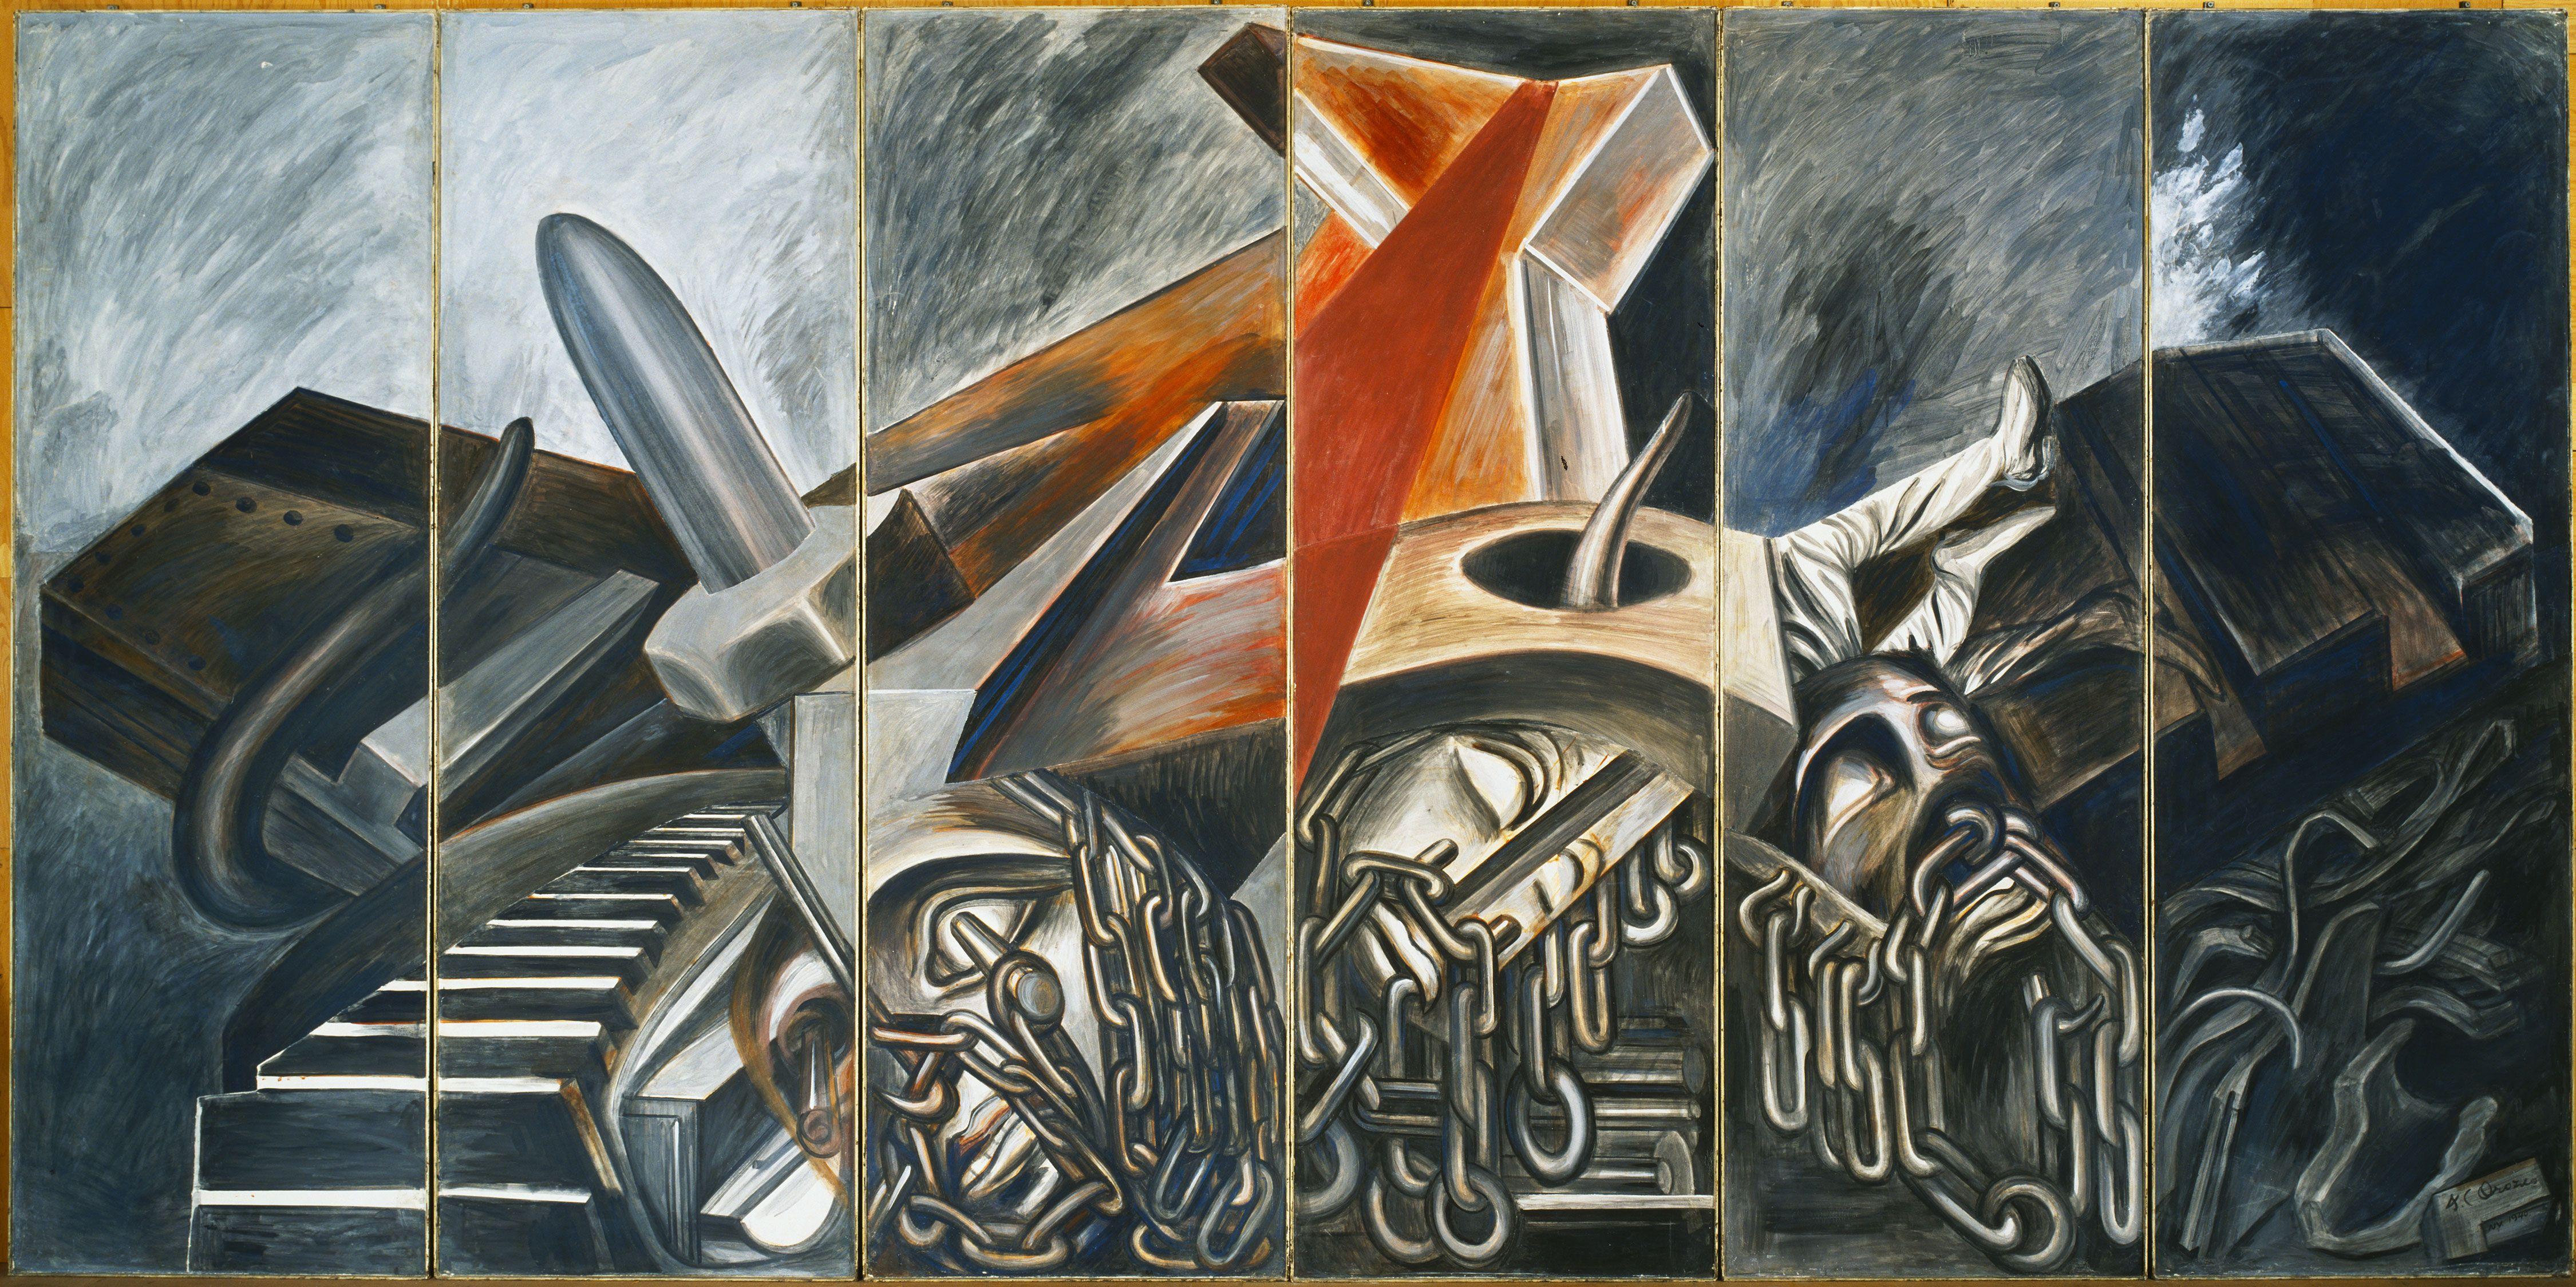 José Clemente Orozco. Dive Bomber and Tank. 1940